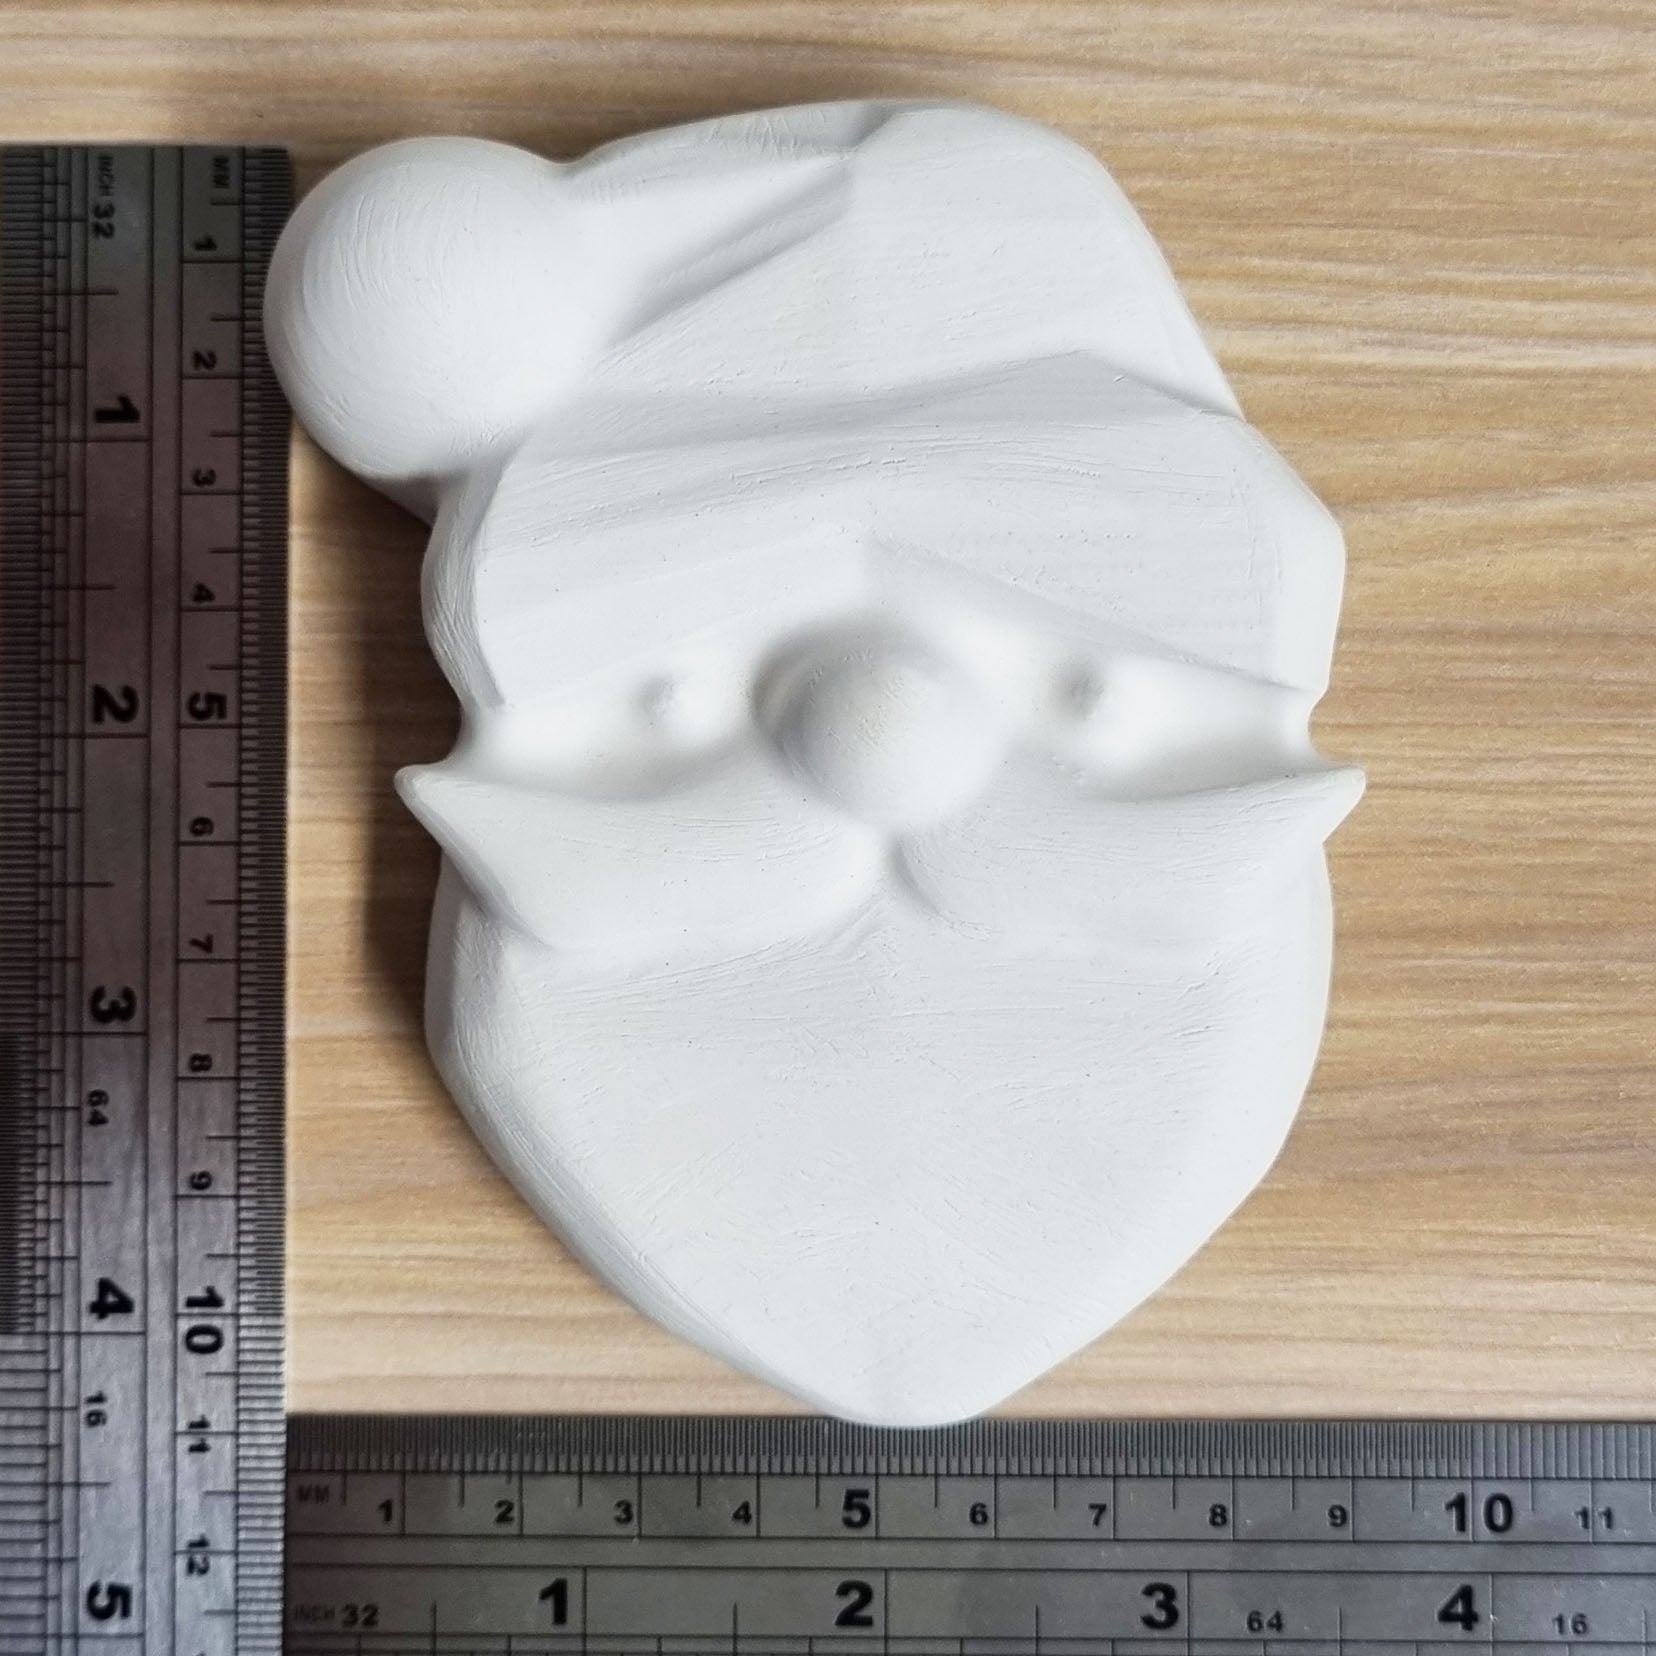 Santa Face Mould | Truly Personal | Bath Bomb, Soap, Resin, Chocolate, Jelly, Wax Melts Mold